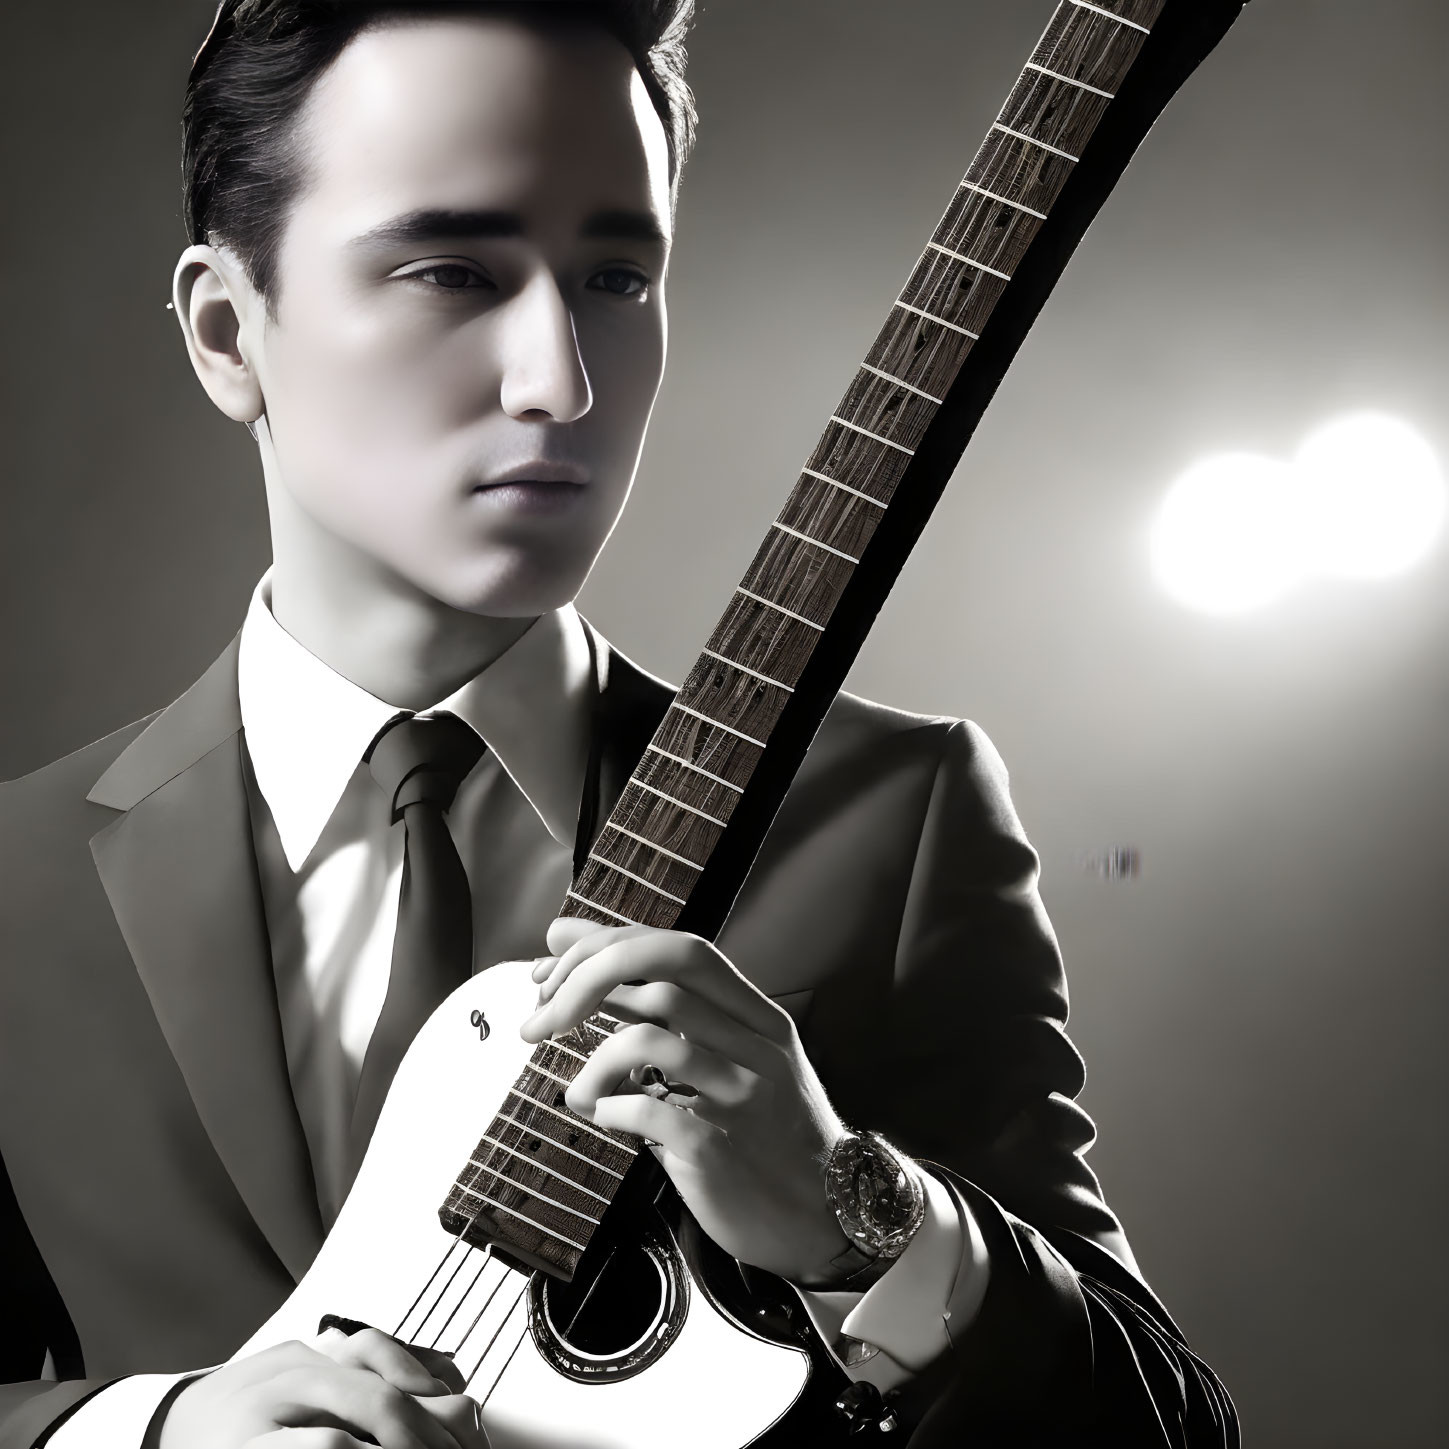 Monochrome image of stylish man in suit with guitar under dramatic lighting